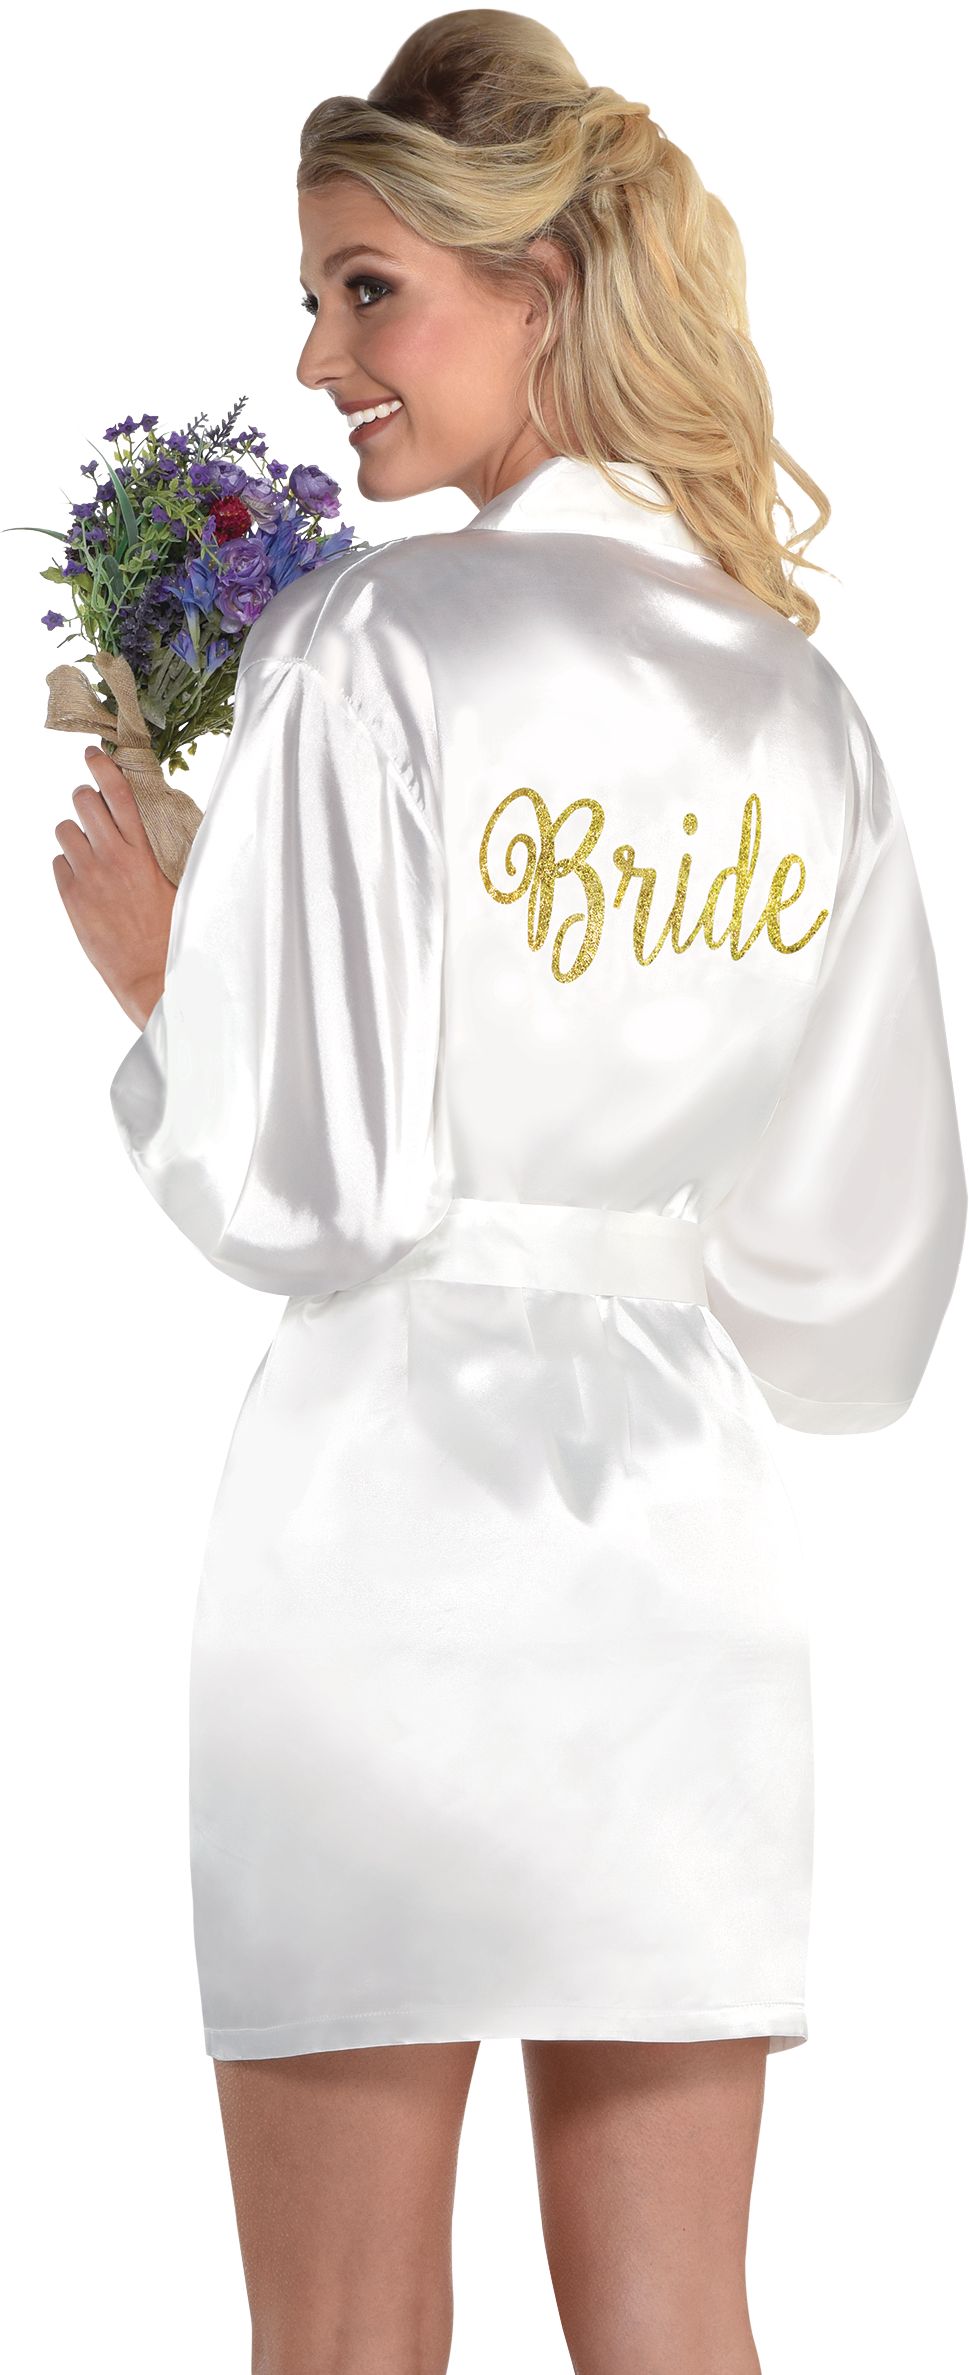 Adult Bride Satin Glitter Robe, Gold/White, One Size, Wearable